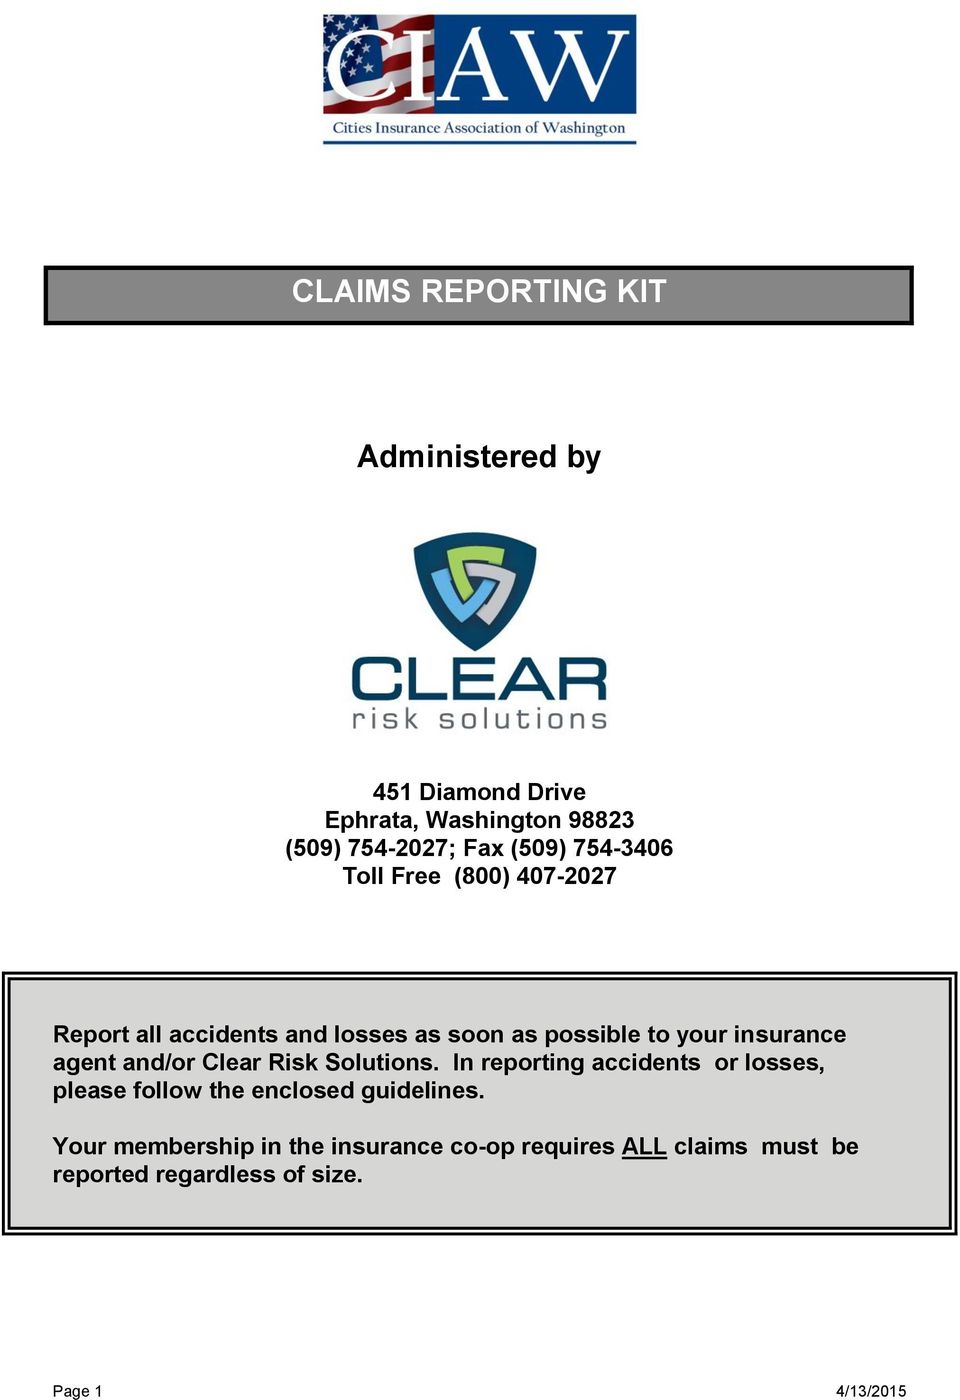 agent and/or Clear Risk Solutions. In reporting accidents or losses, please follow the enclosed guidelines.